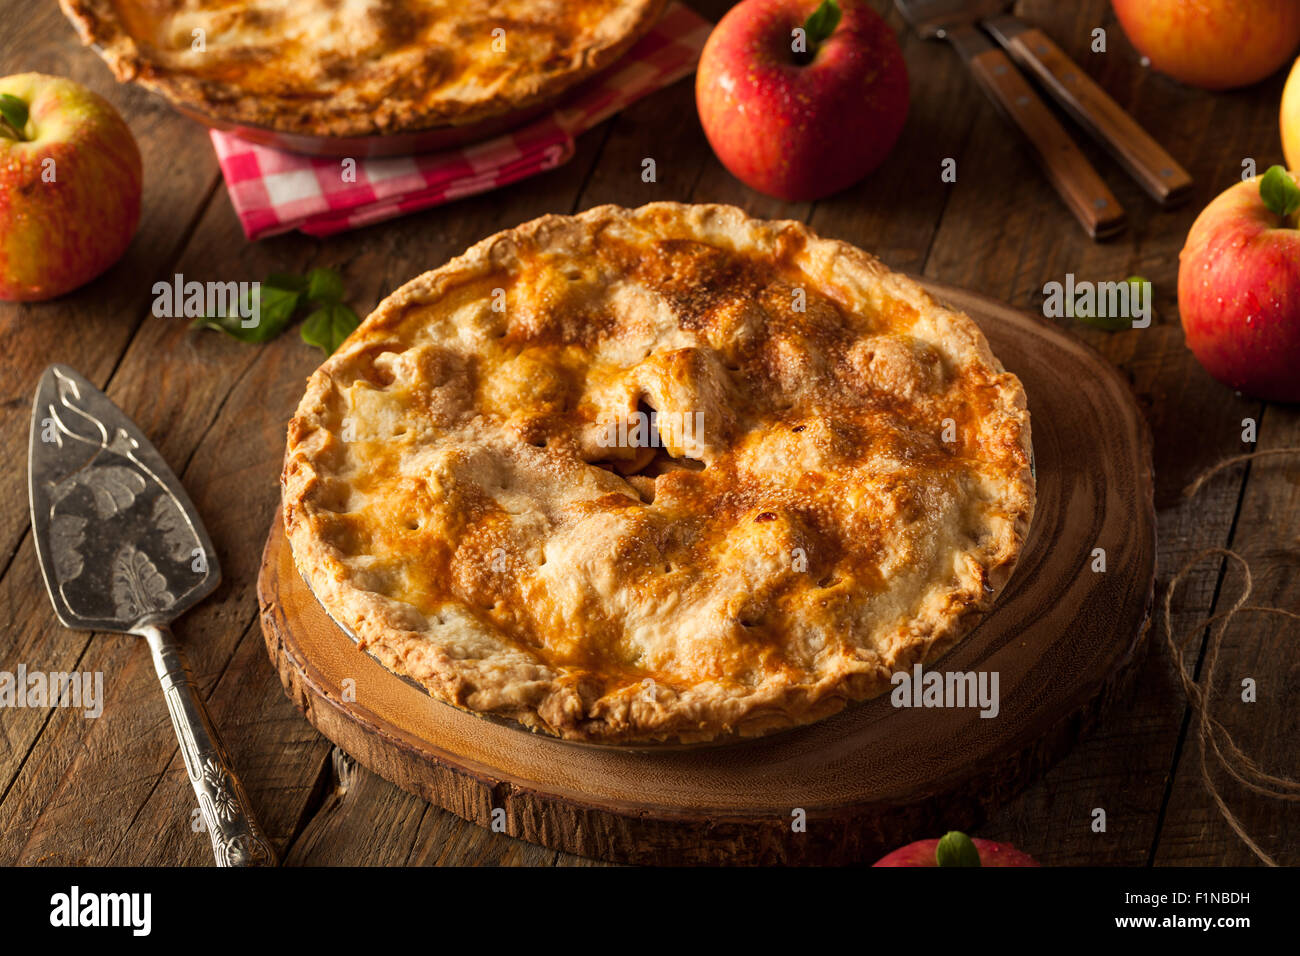 Fresh Homemade Apple Pie with a Flakey Crust Stock Photo